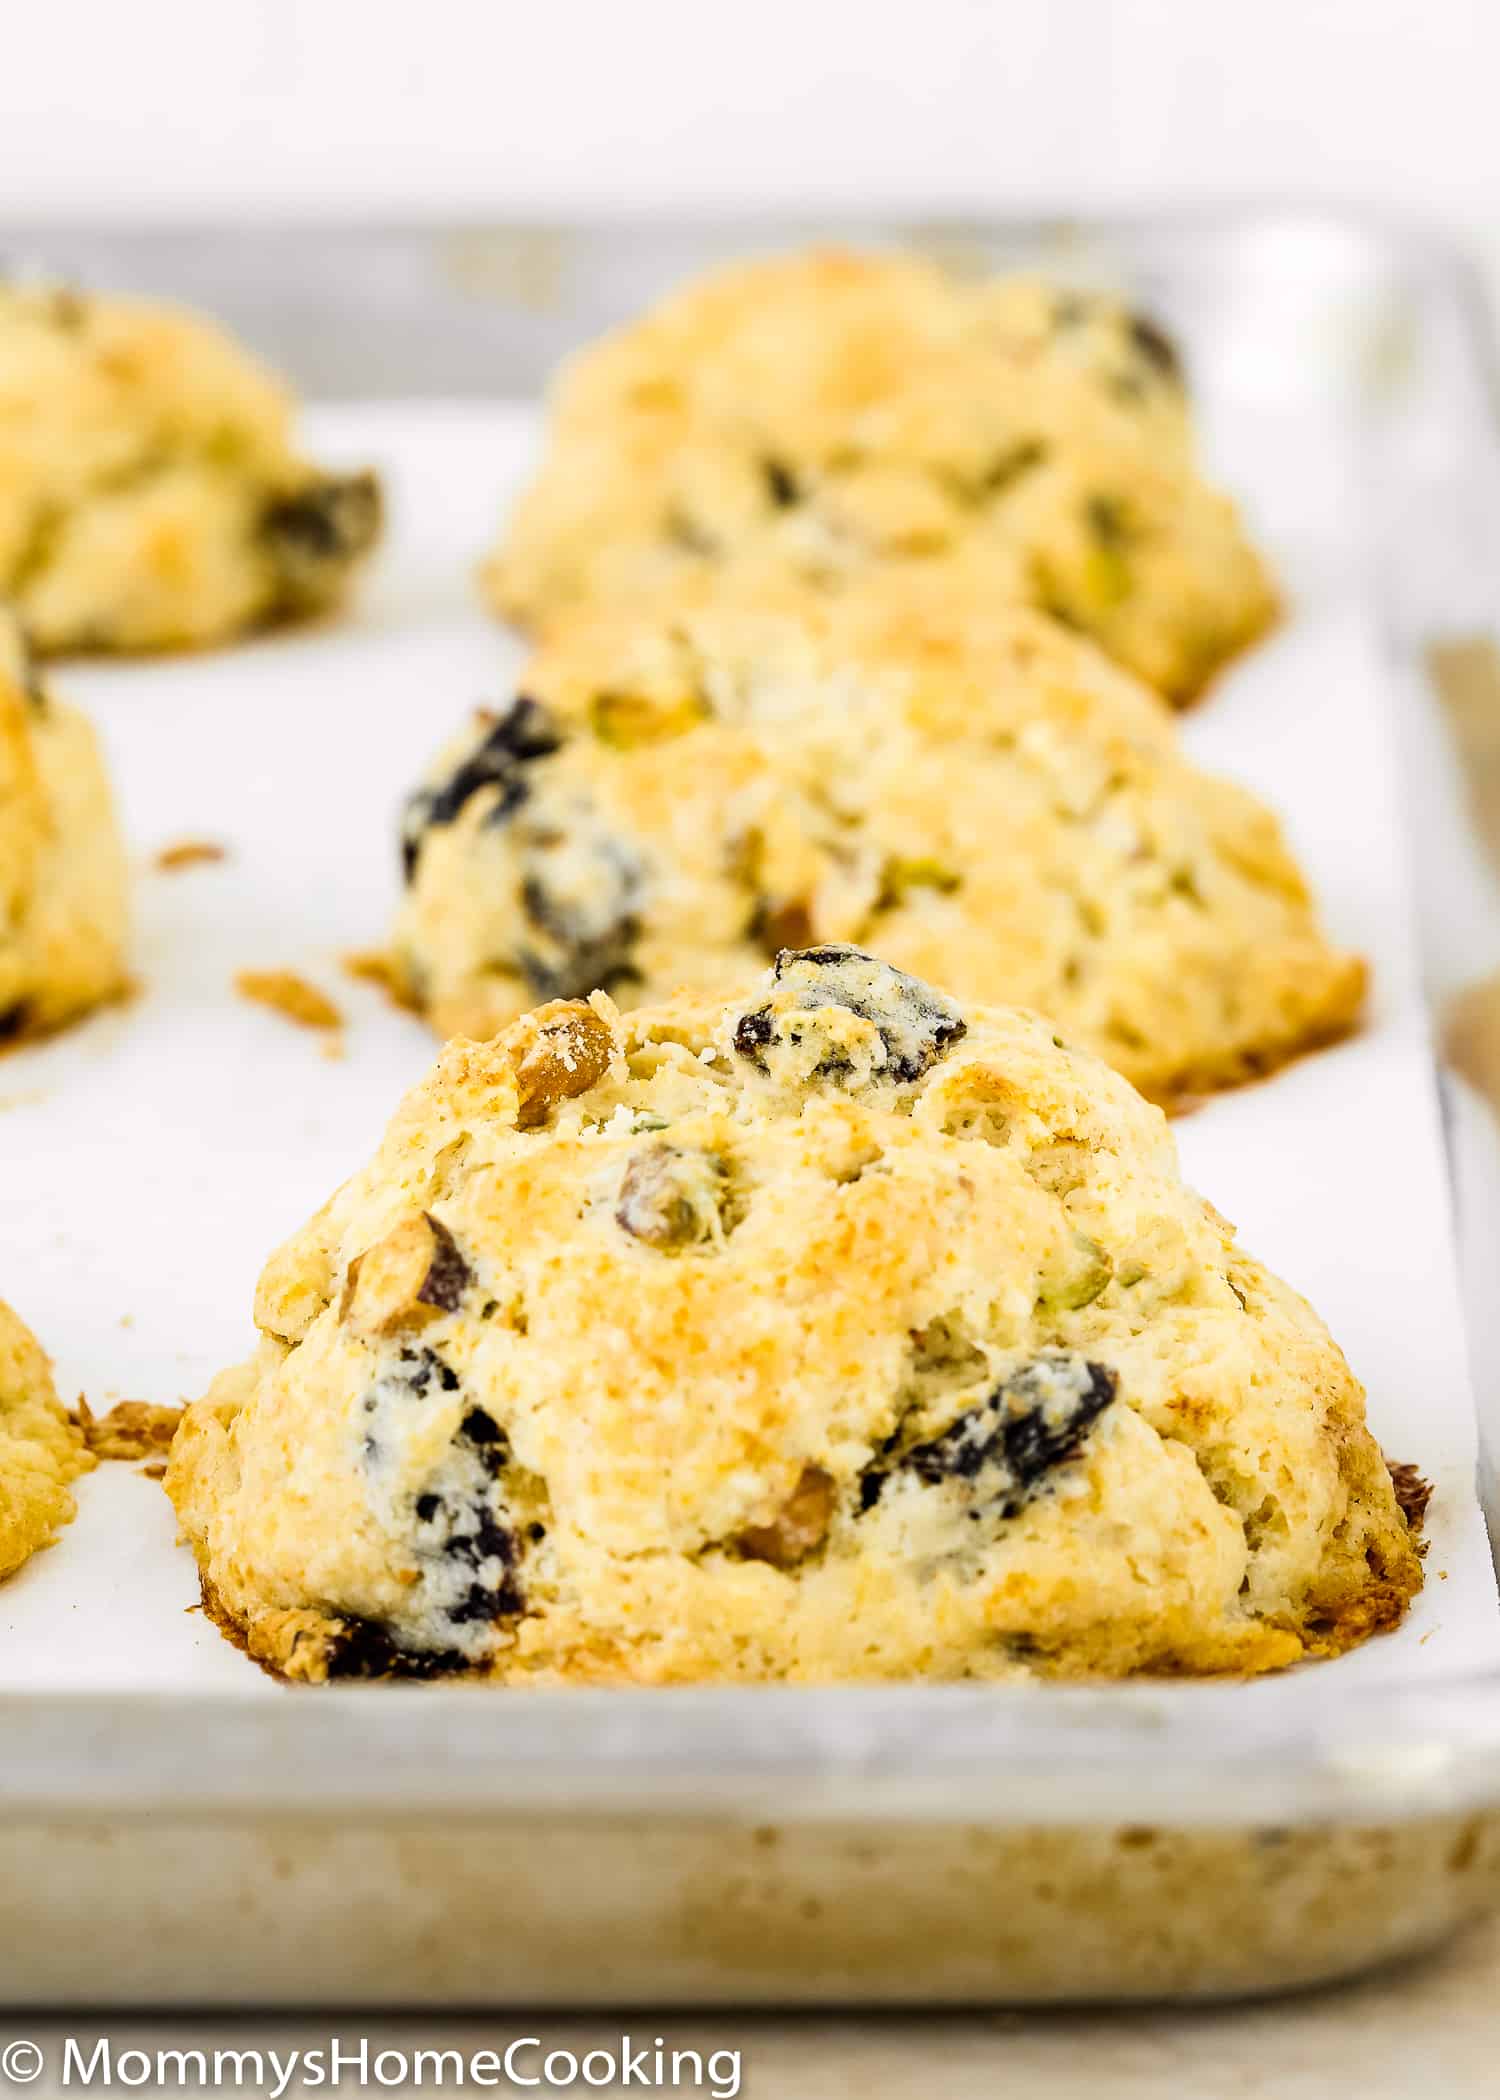 These Eggless Prune-Pistachio Scones are über buttery and flaky! Made from scratch with California prunes and pistachios, these scones make a delightful sweet treat for any occasion. They will be a big hit every time you make them. https://mommyshomecooking.com